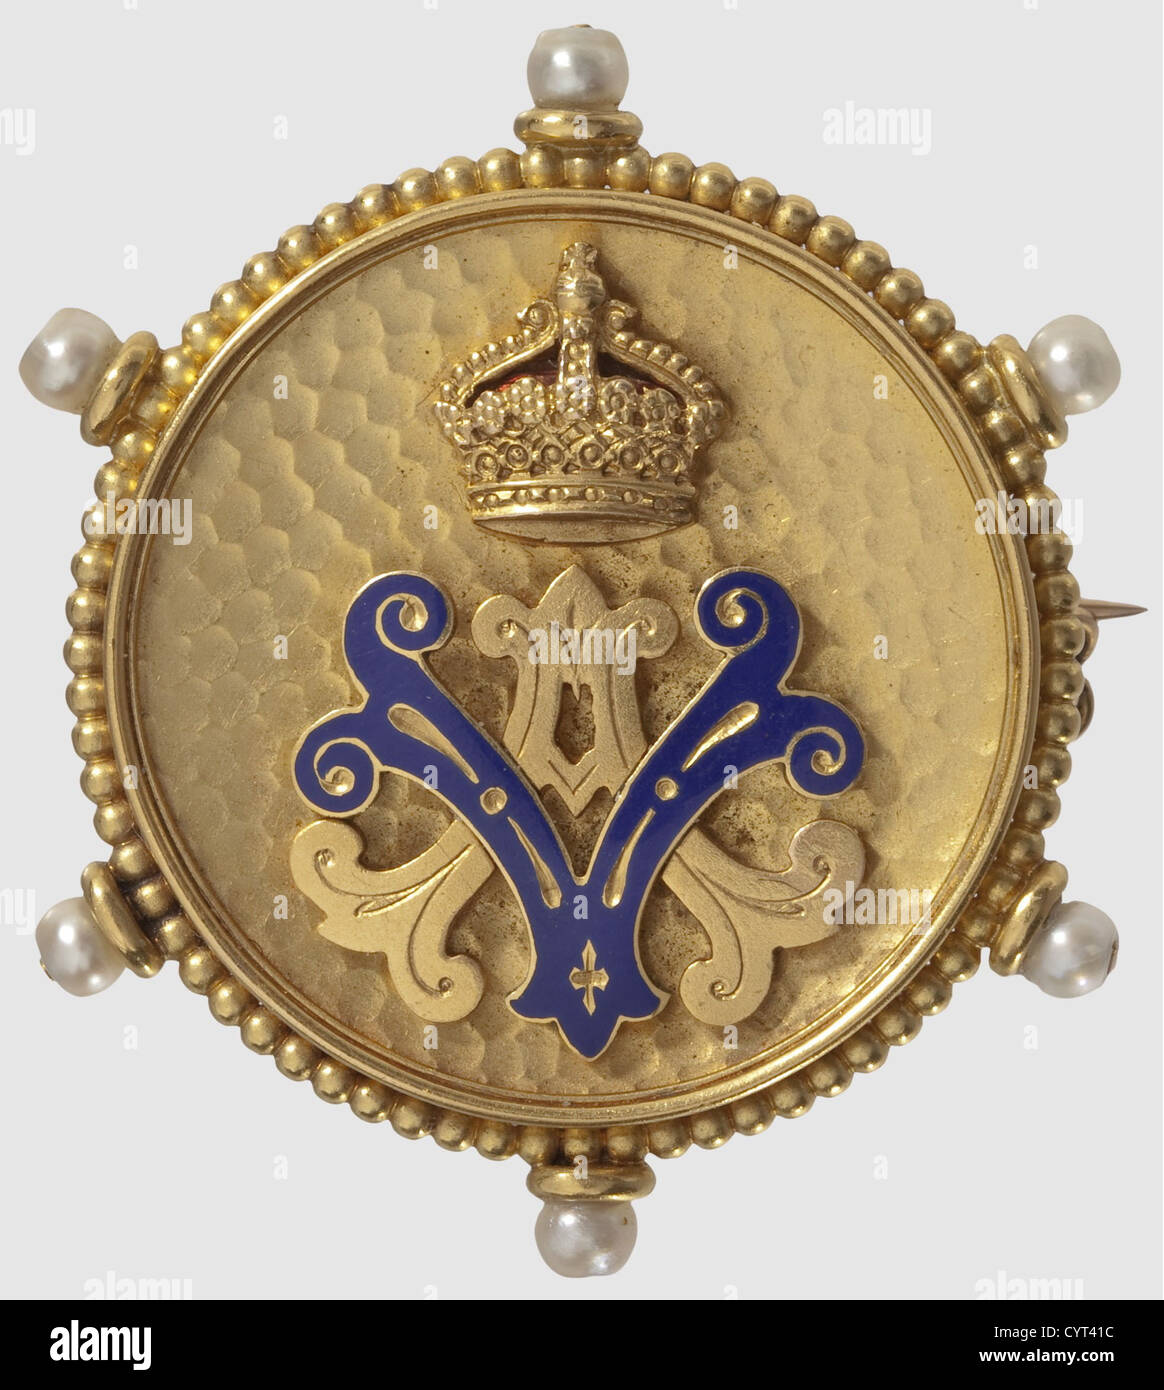 Empress Auguste Victoria,gift brooch in case Circular brooch of gold-plated non-ferrous metal,pin and attached chain of solid gold. The obverse with applied monogram 'AV' surmounted by imperial crown,letter 'V' enamelled in Prussian blue. The edge decorated with six small pearls. In red brown leather case with velvet and silk lining,gold embossed 'AV' surmounted by a crown,maker's stamp 'H. J. Wilm Königl. Hof-Juwelier Berlin',weight ca. 11.5 g,diameter 35 mm,historic,historical,19th century,Prussian,Prussia,German,Germany,militaria,military,ob,Additional-Rights-Clearences-Not Available Stock Photo